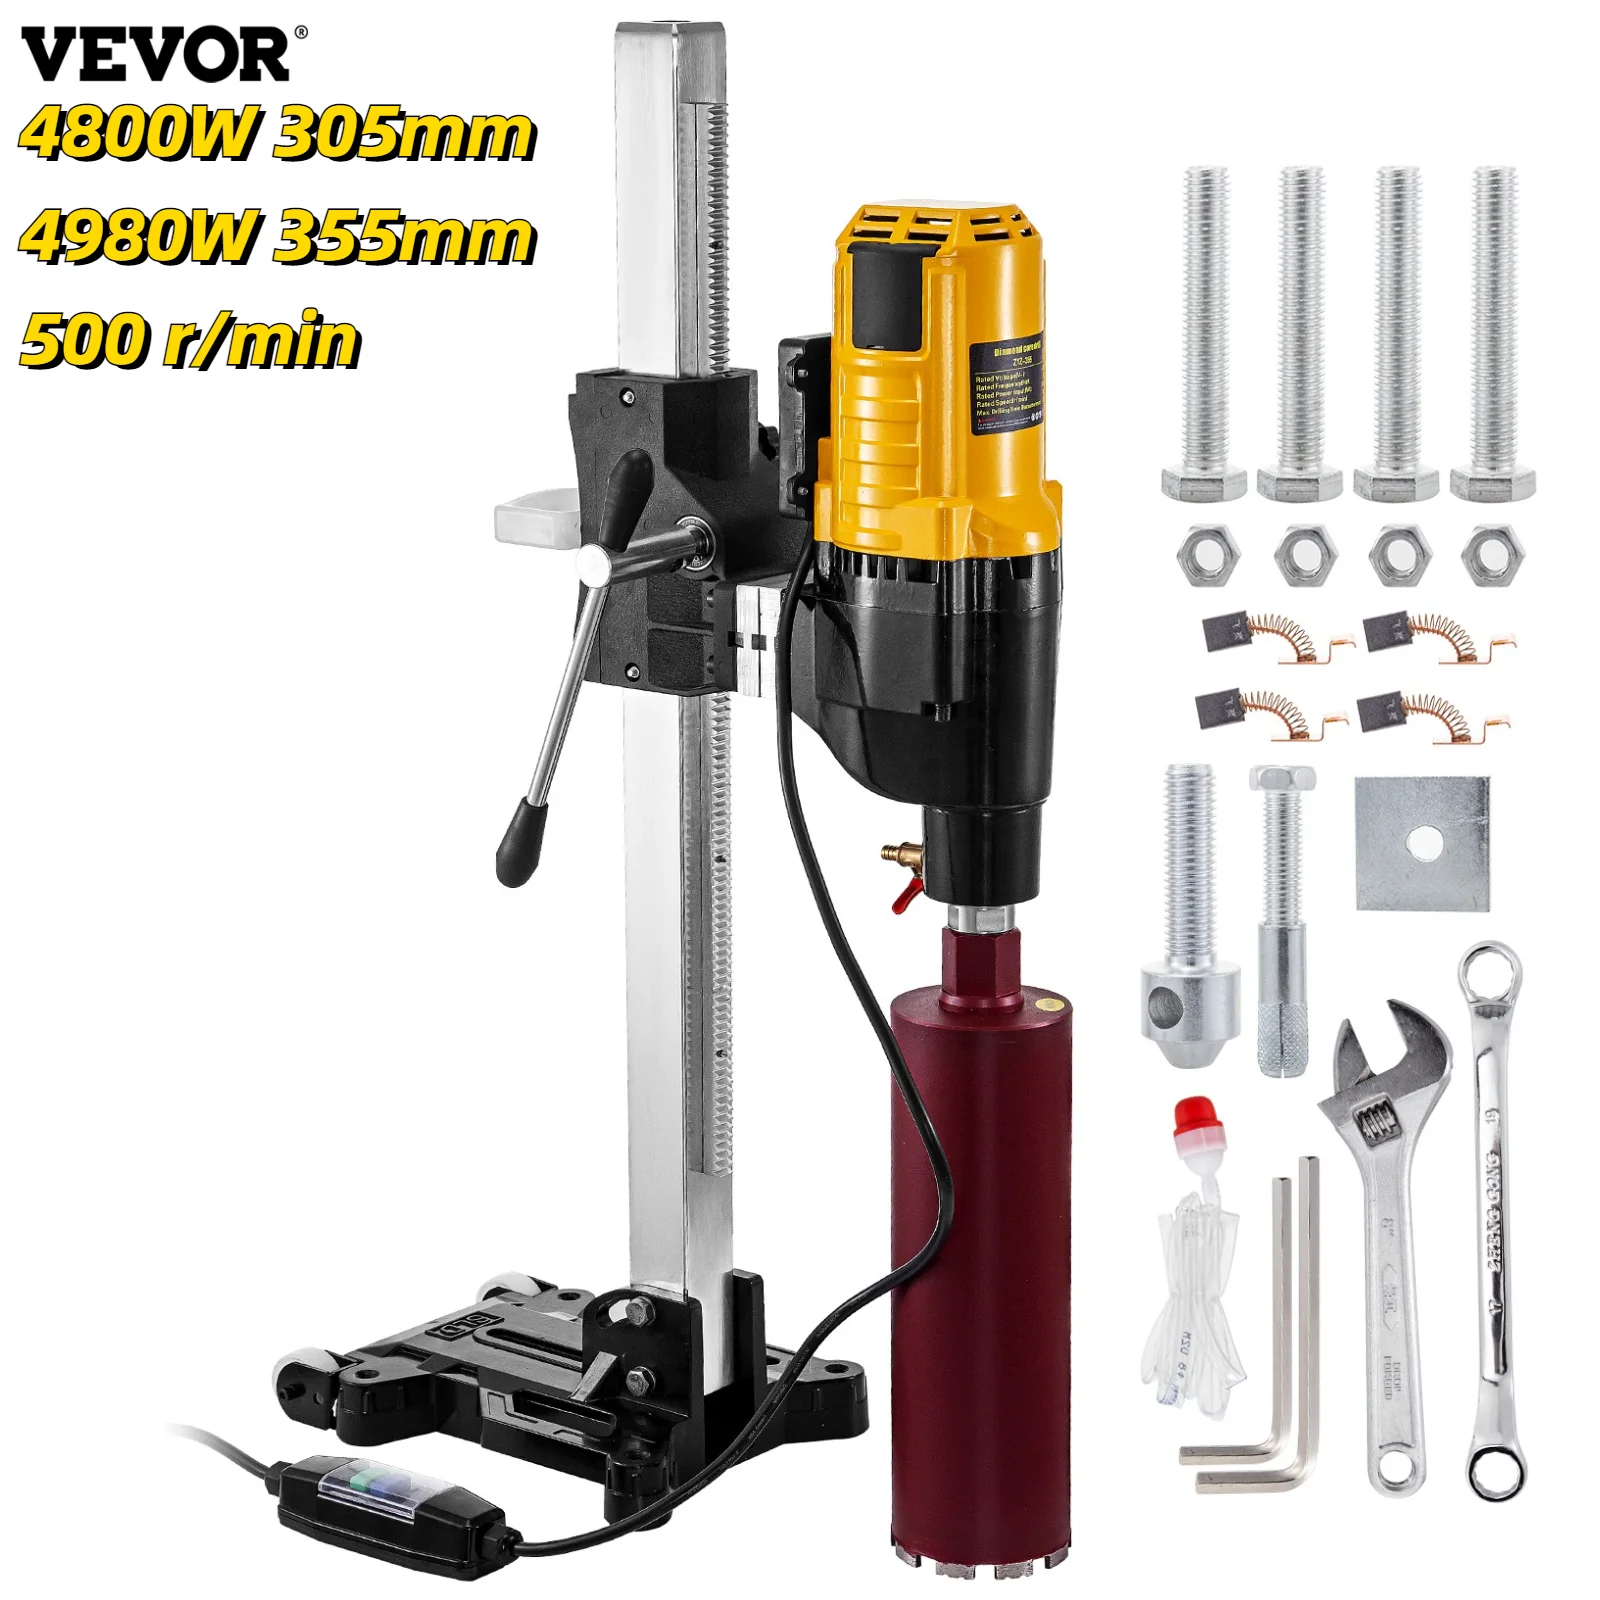 VEVOR Diamond Core Drill Rig 305mm 355mm Stand Heavy Duty Concrete Drilling Machine Kit 4800W 4980W Installing Pipes Railings